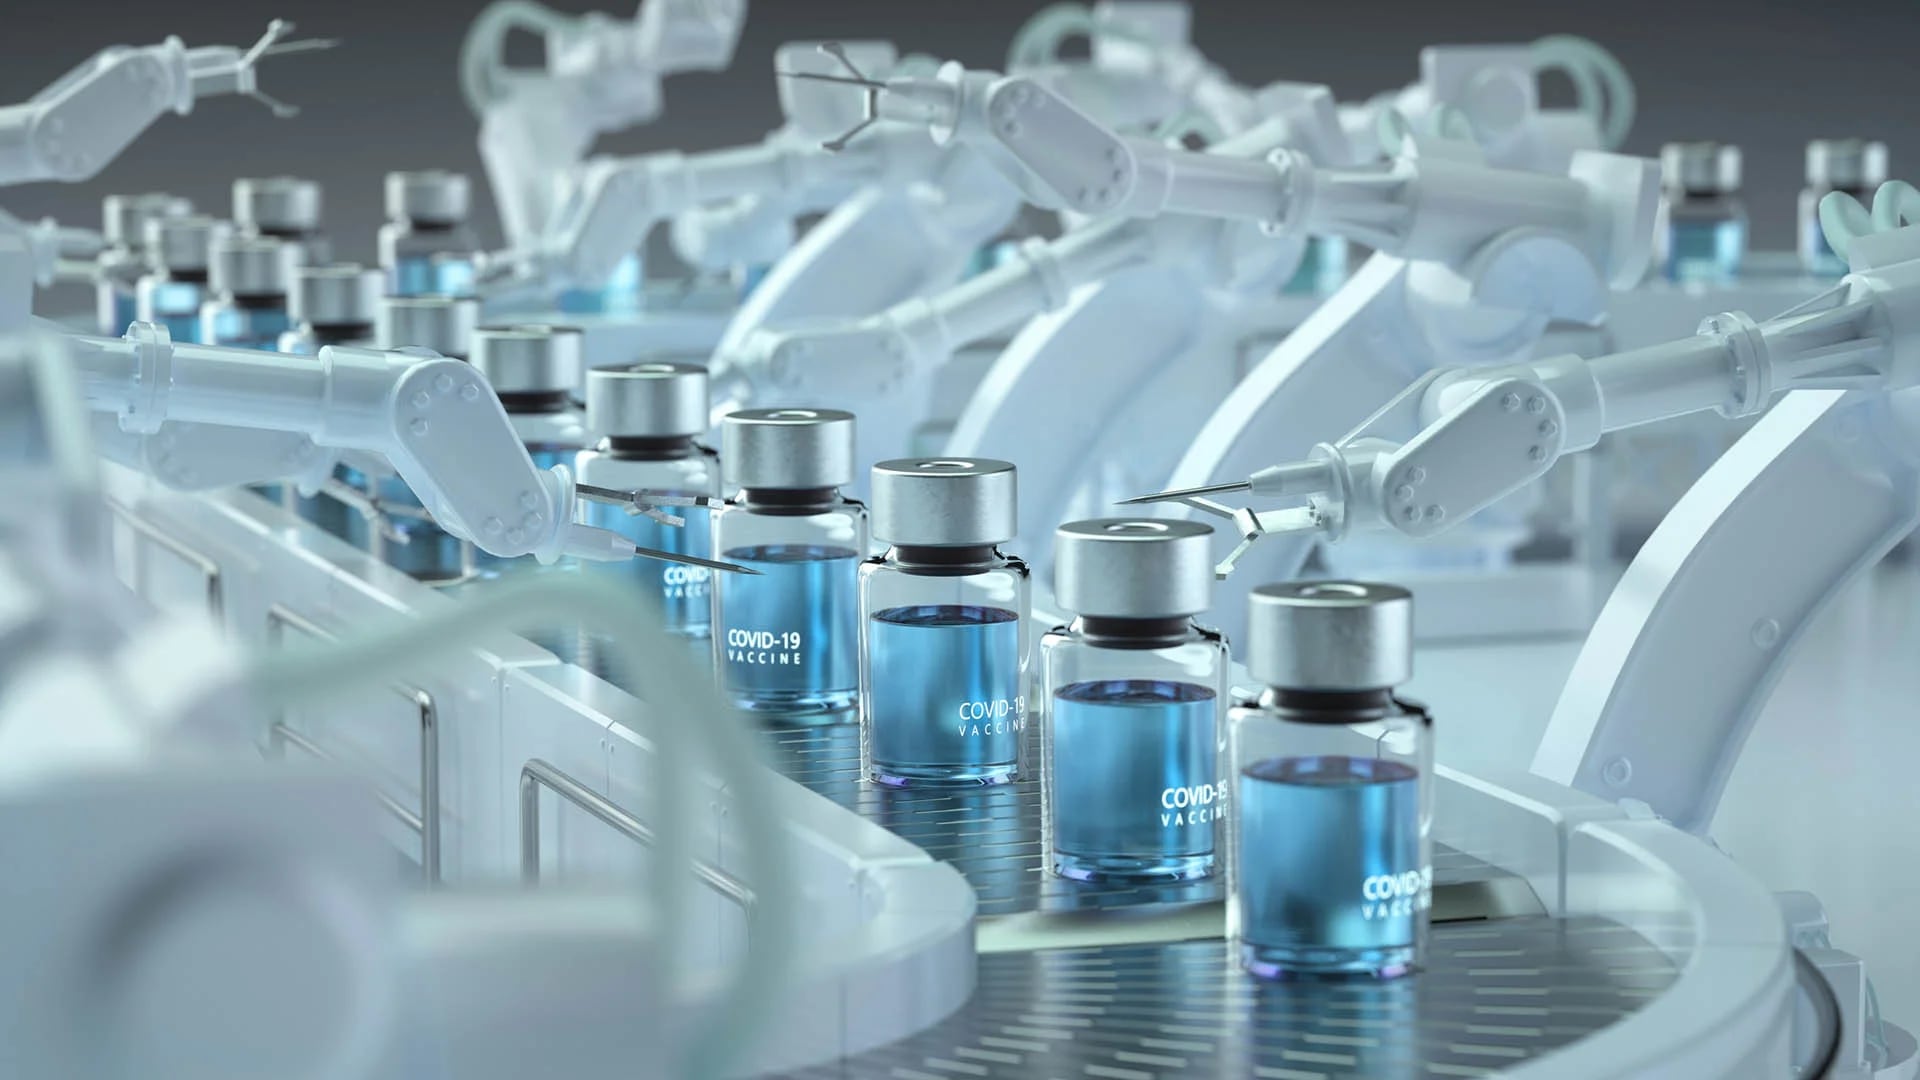 Digitally generated image of COVID-19 vaccine vials on a robotic production line.